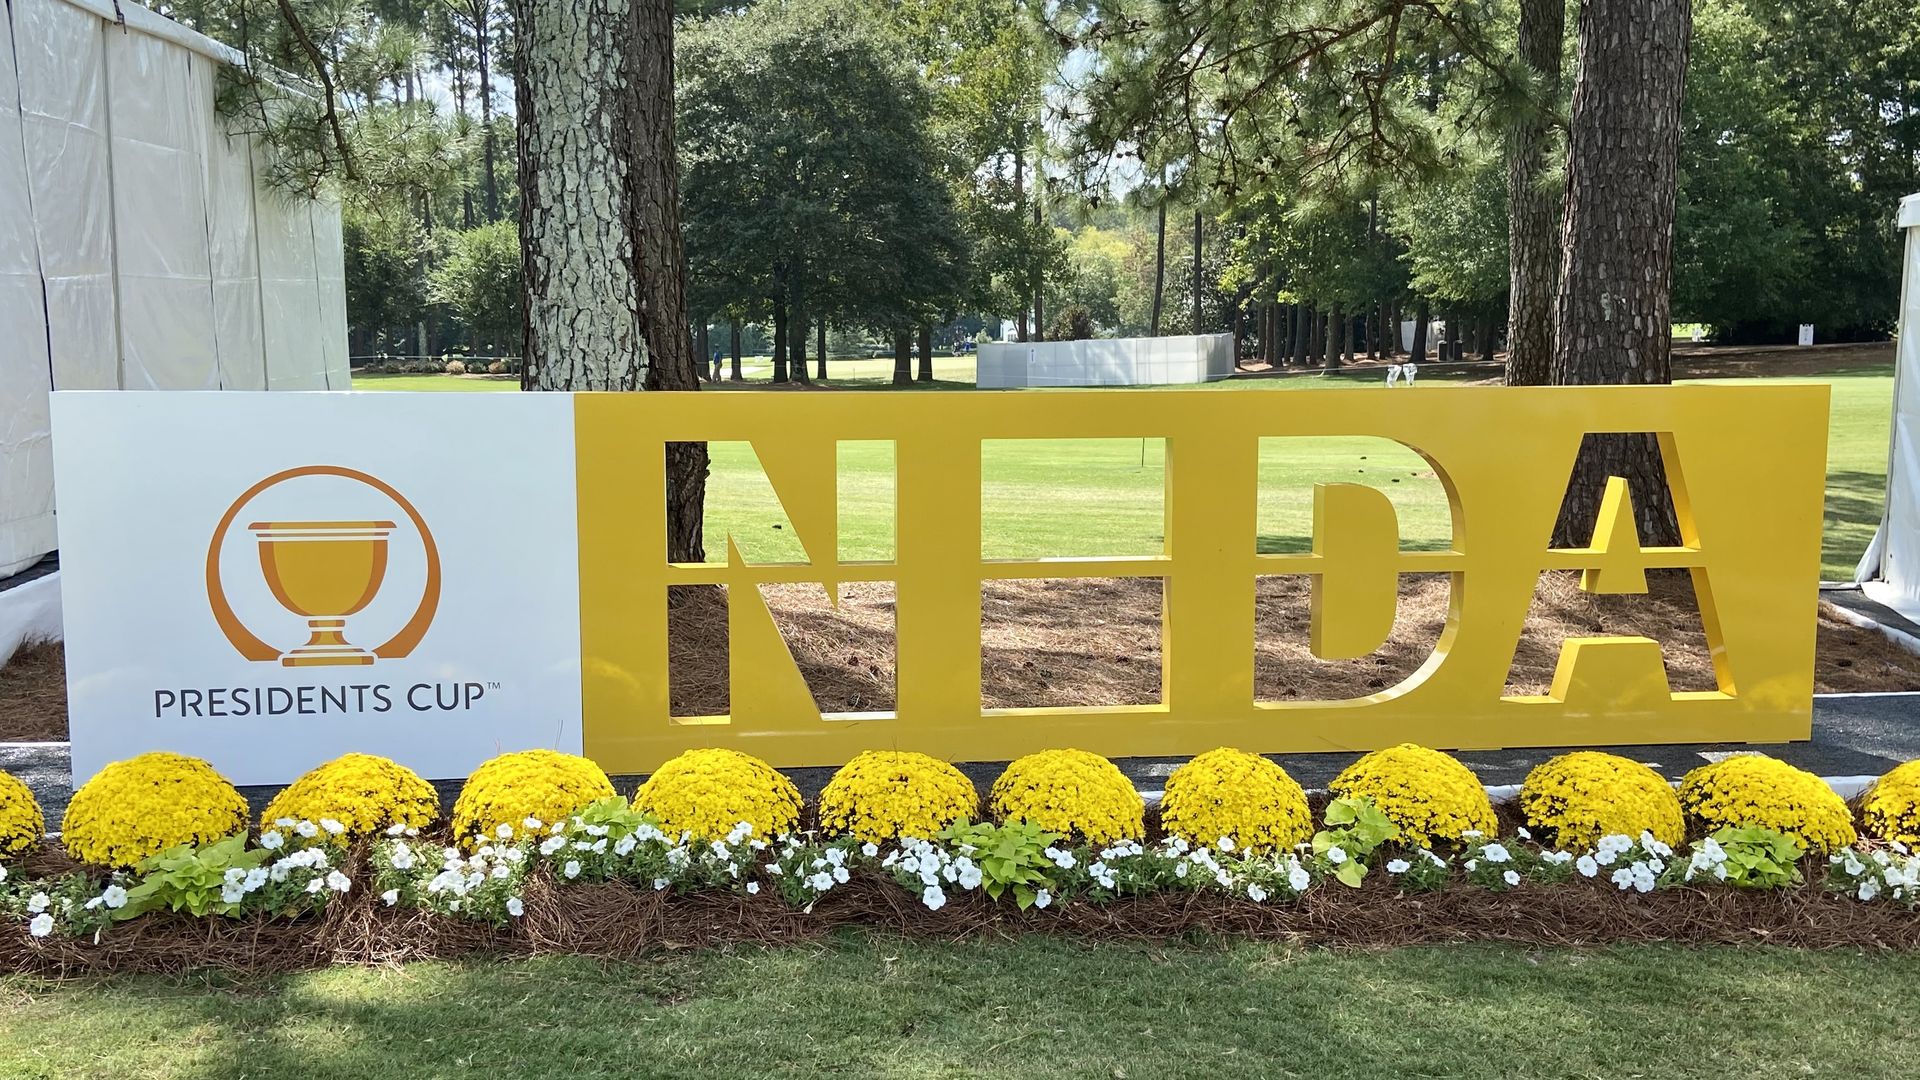 Sinage that reads "NoDa" in yellow in front of yellow flowers on a golf course